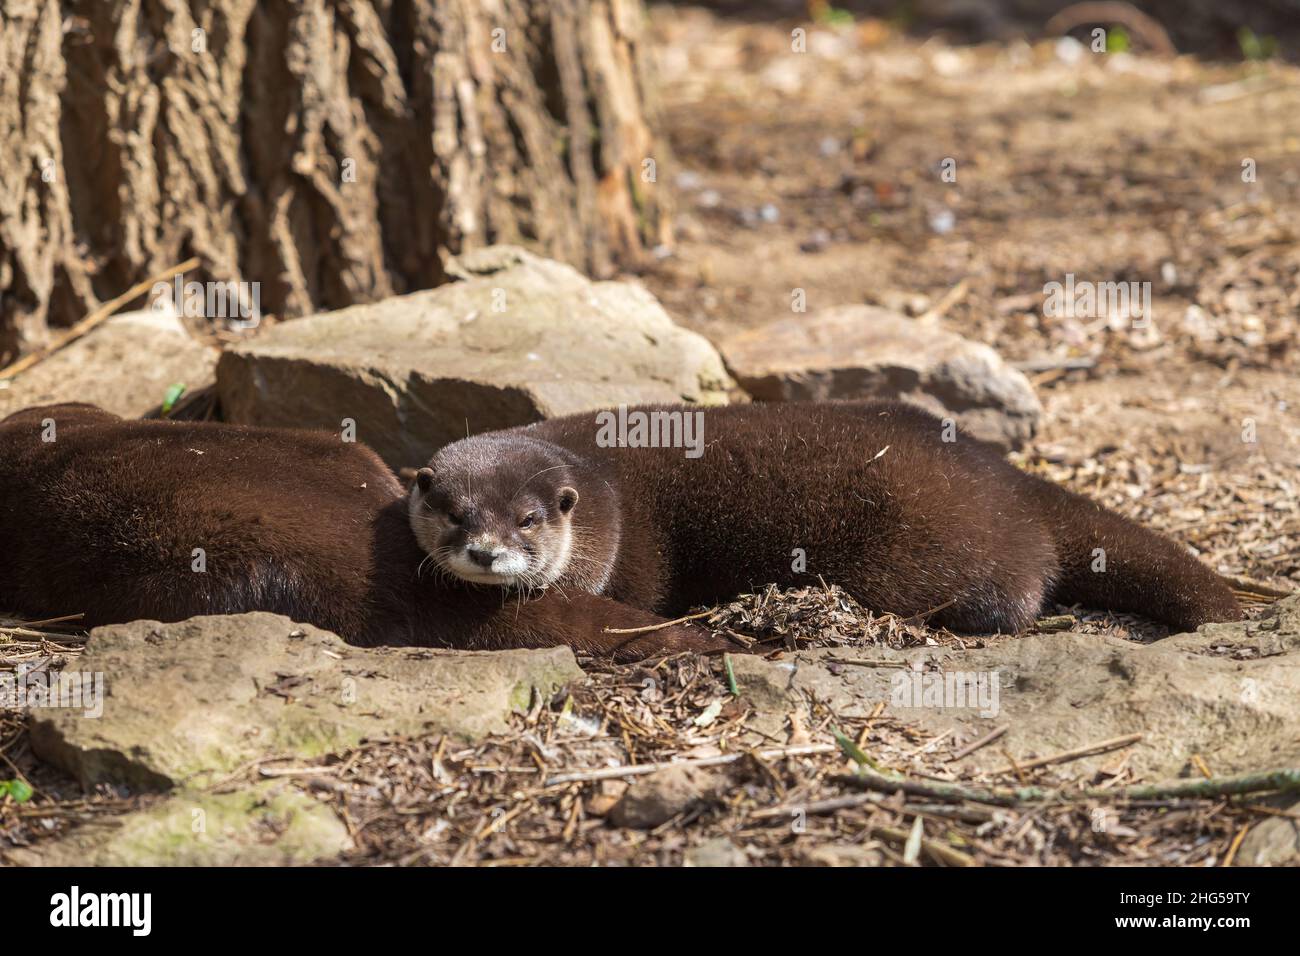 River otter - Lutra lutra lies on stones in front of a tree. Small aquatic furry animal. Stock Photo